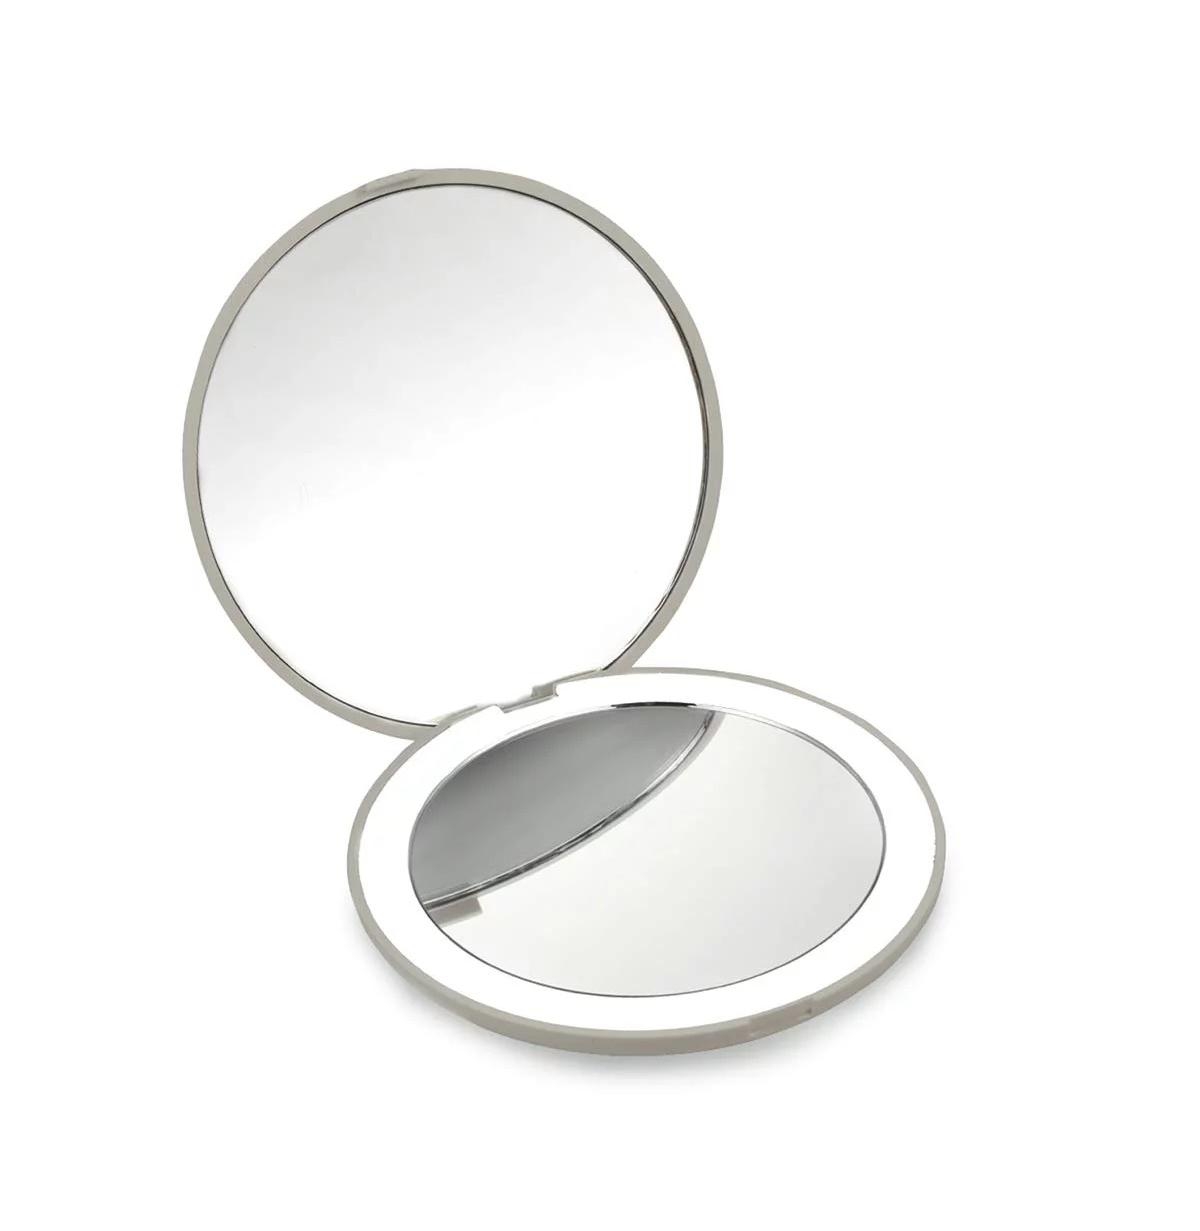 1x/10x Magnification Lighted Travel Folding Makeup Mirror 3.5 inch - White